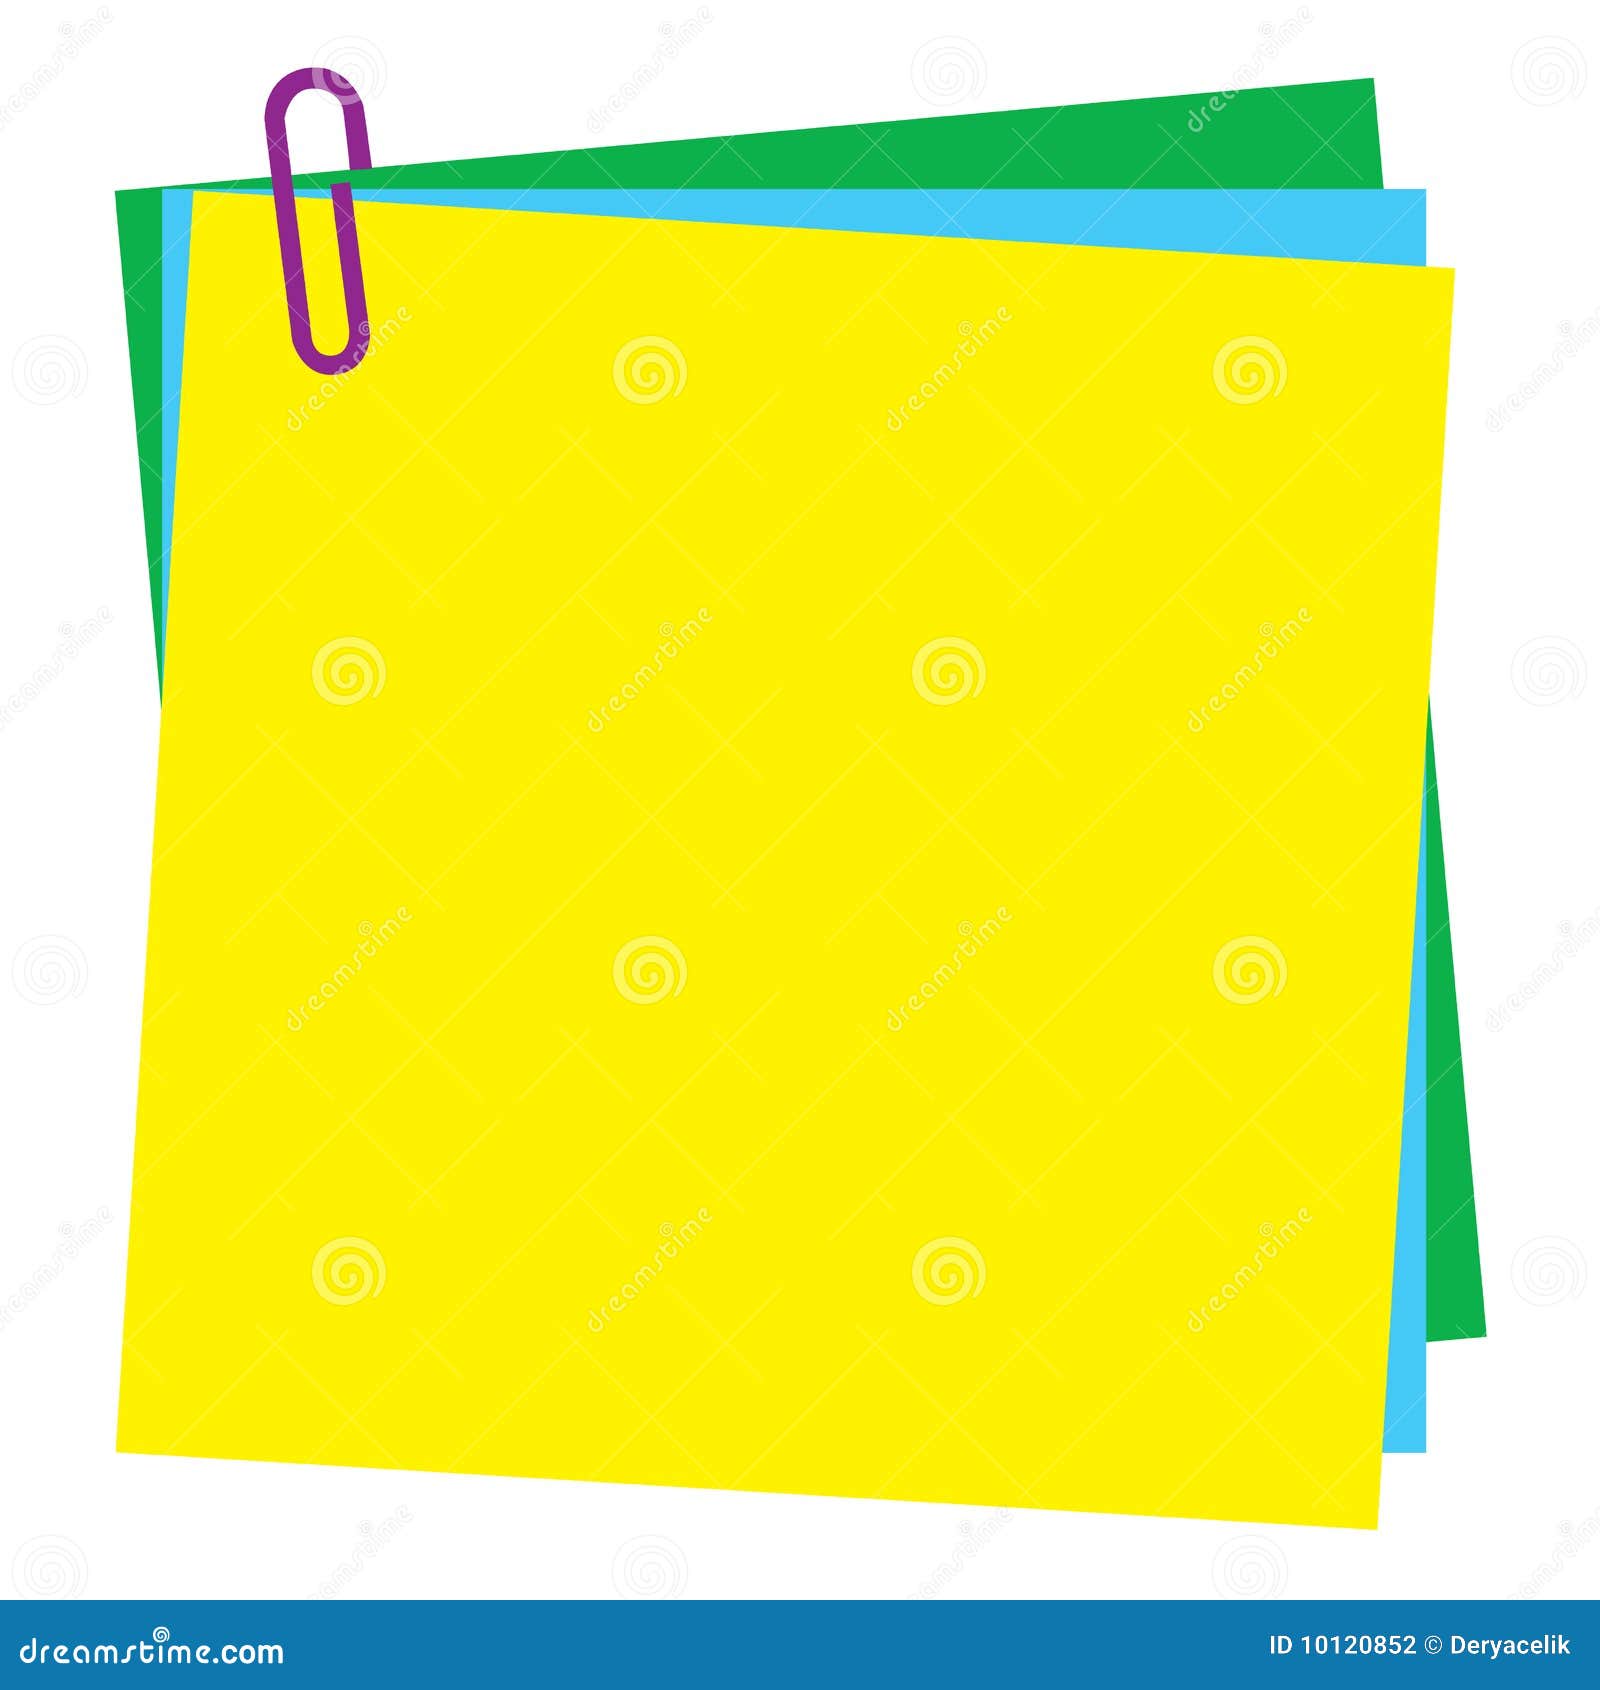 blank post-it note paper with paperclip